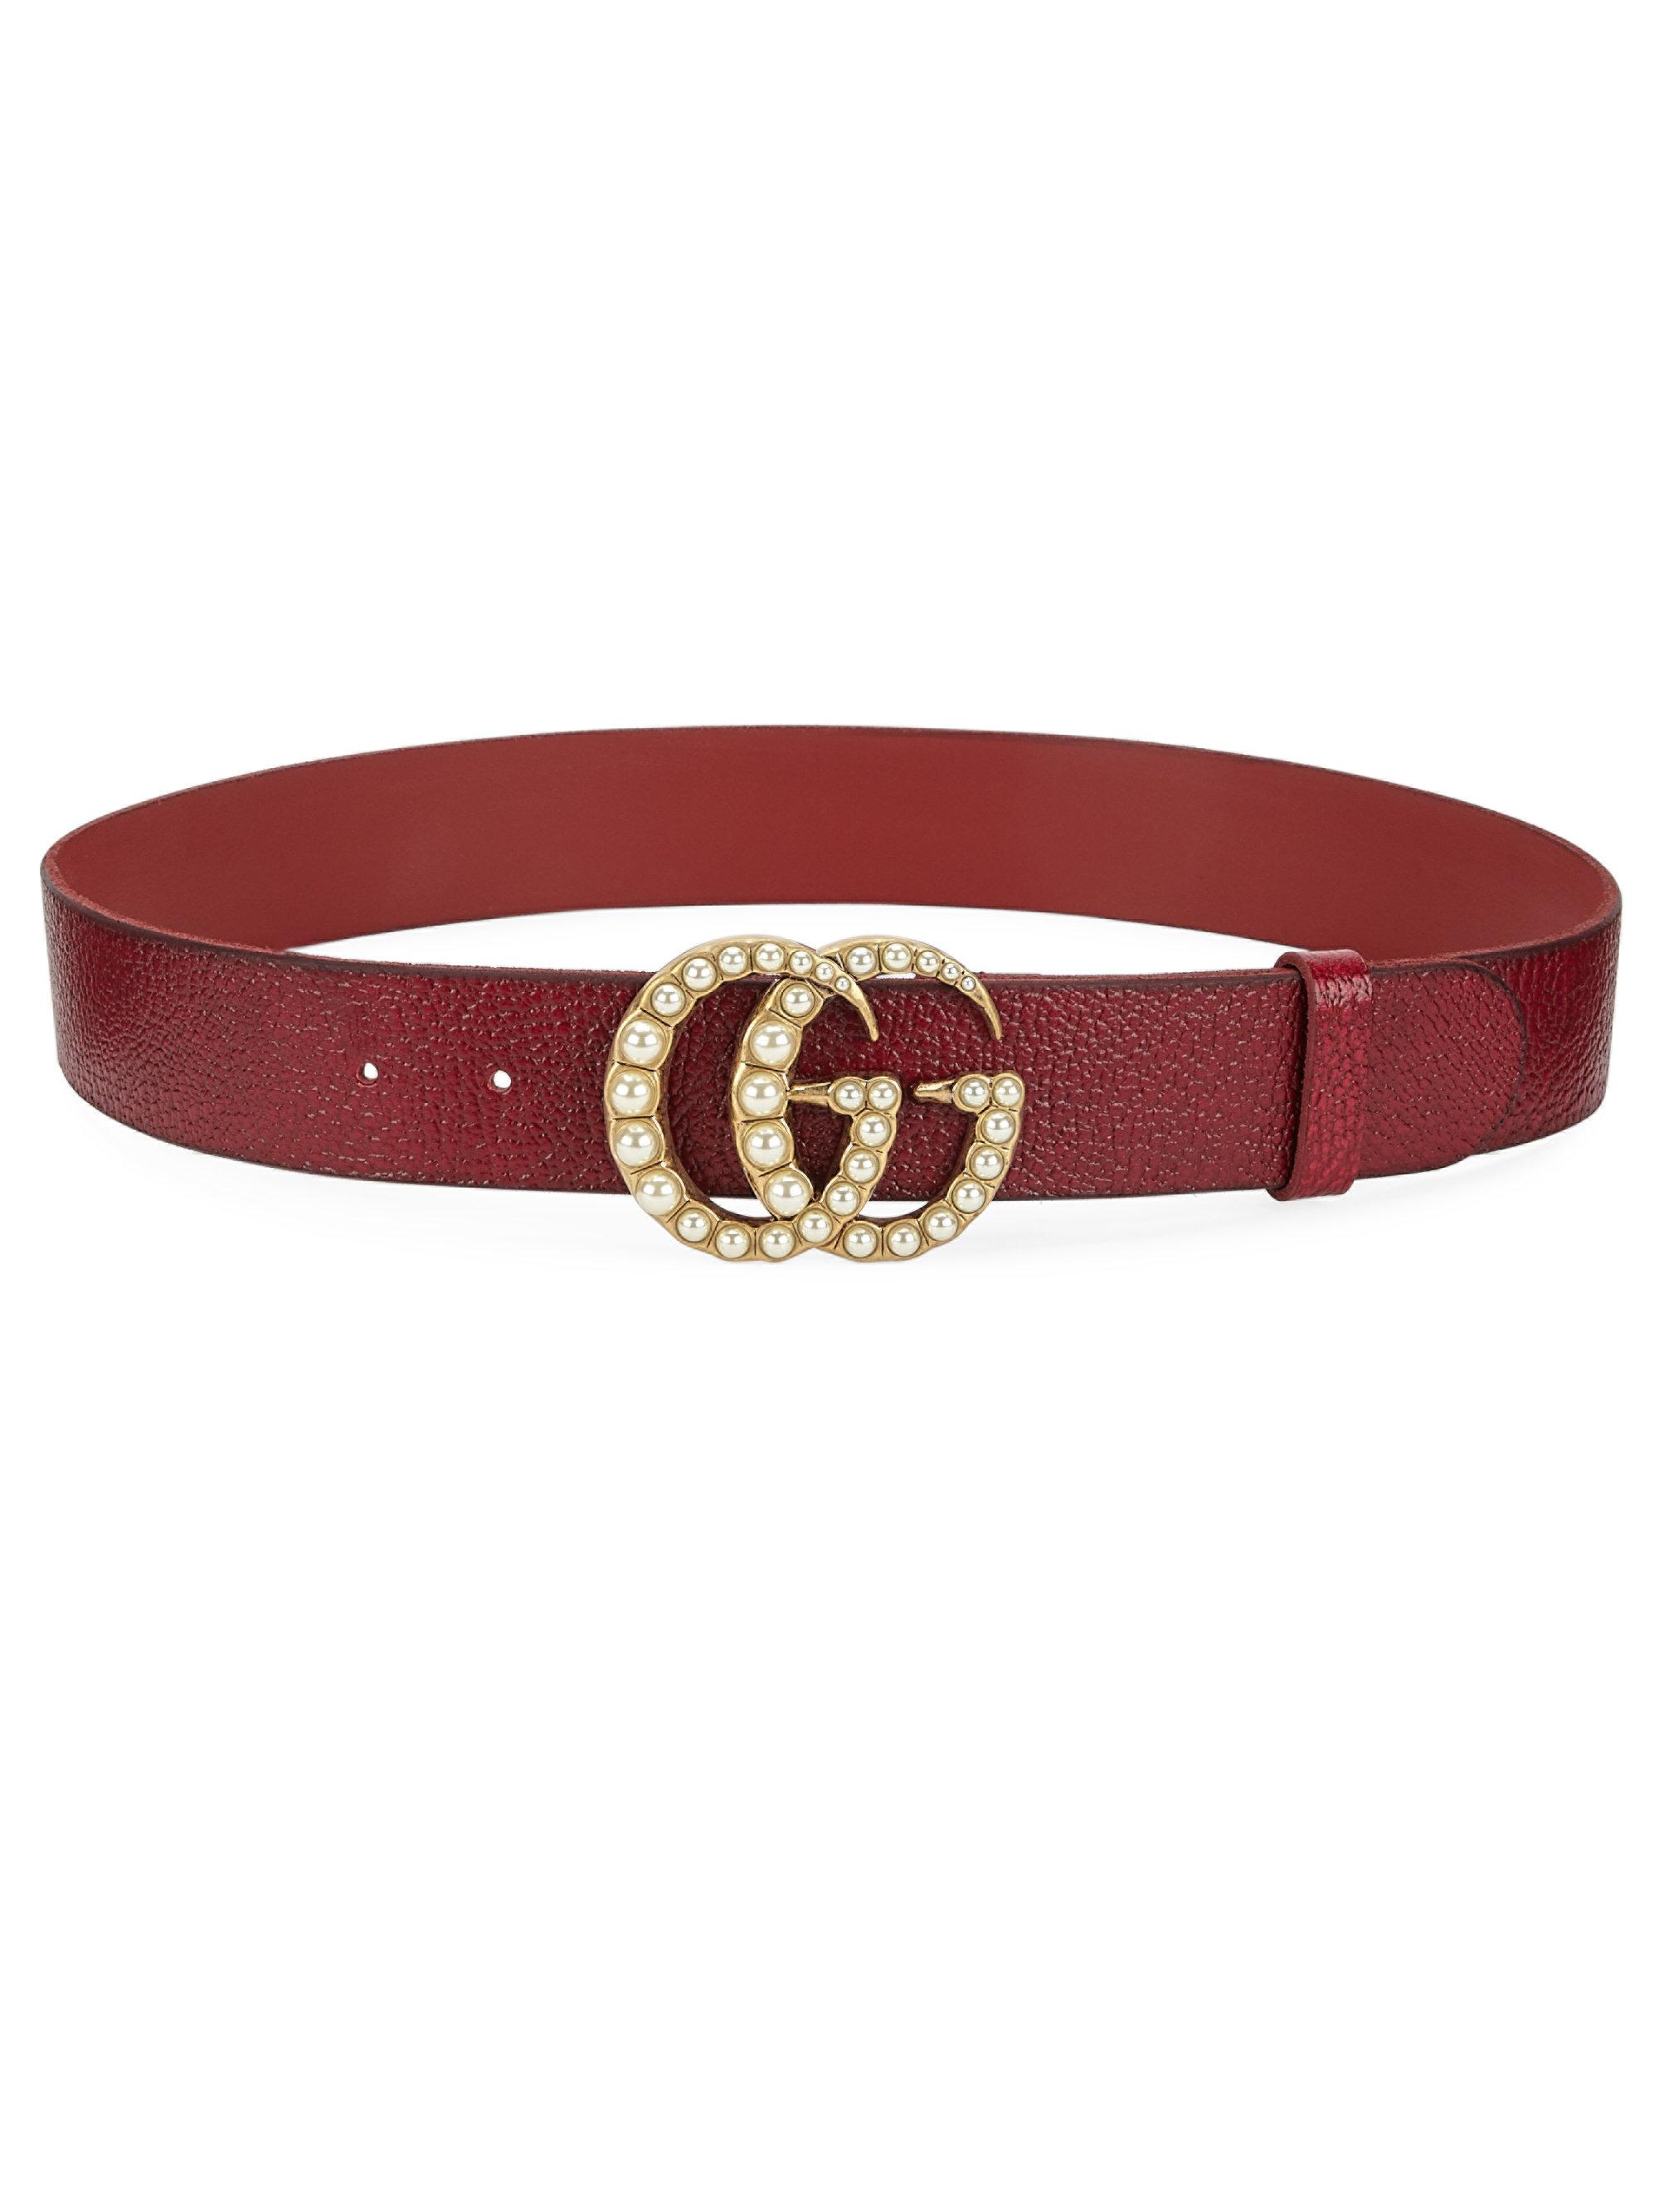 LADIES SIGNATURE GOLDTONE DOUBLE G GUCCI BELT BUCKLE WITH NAVY RED SIG BELT  SM